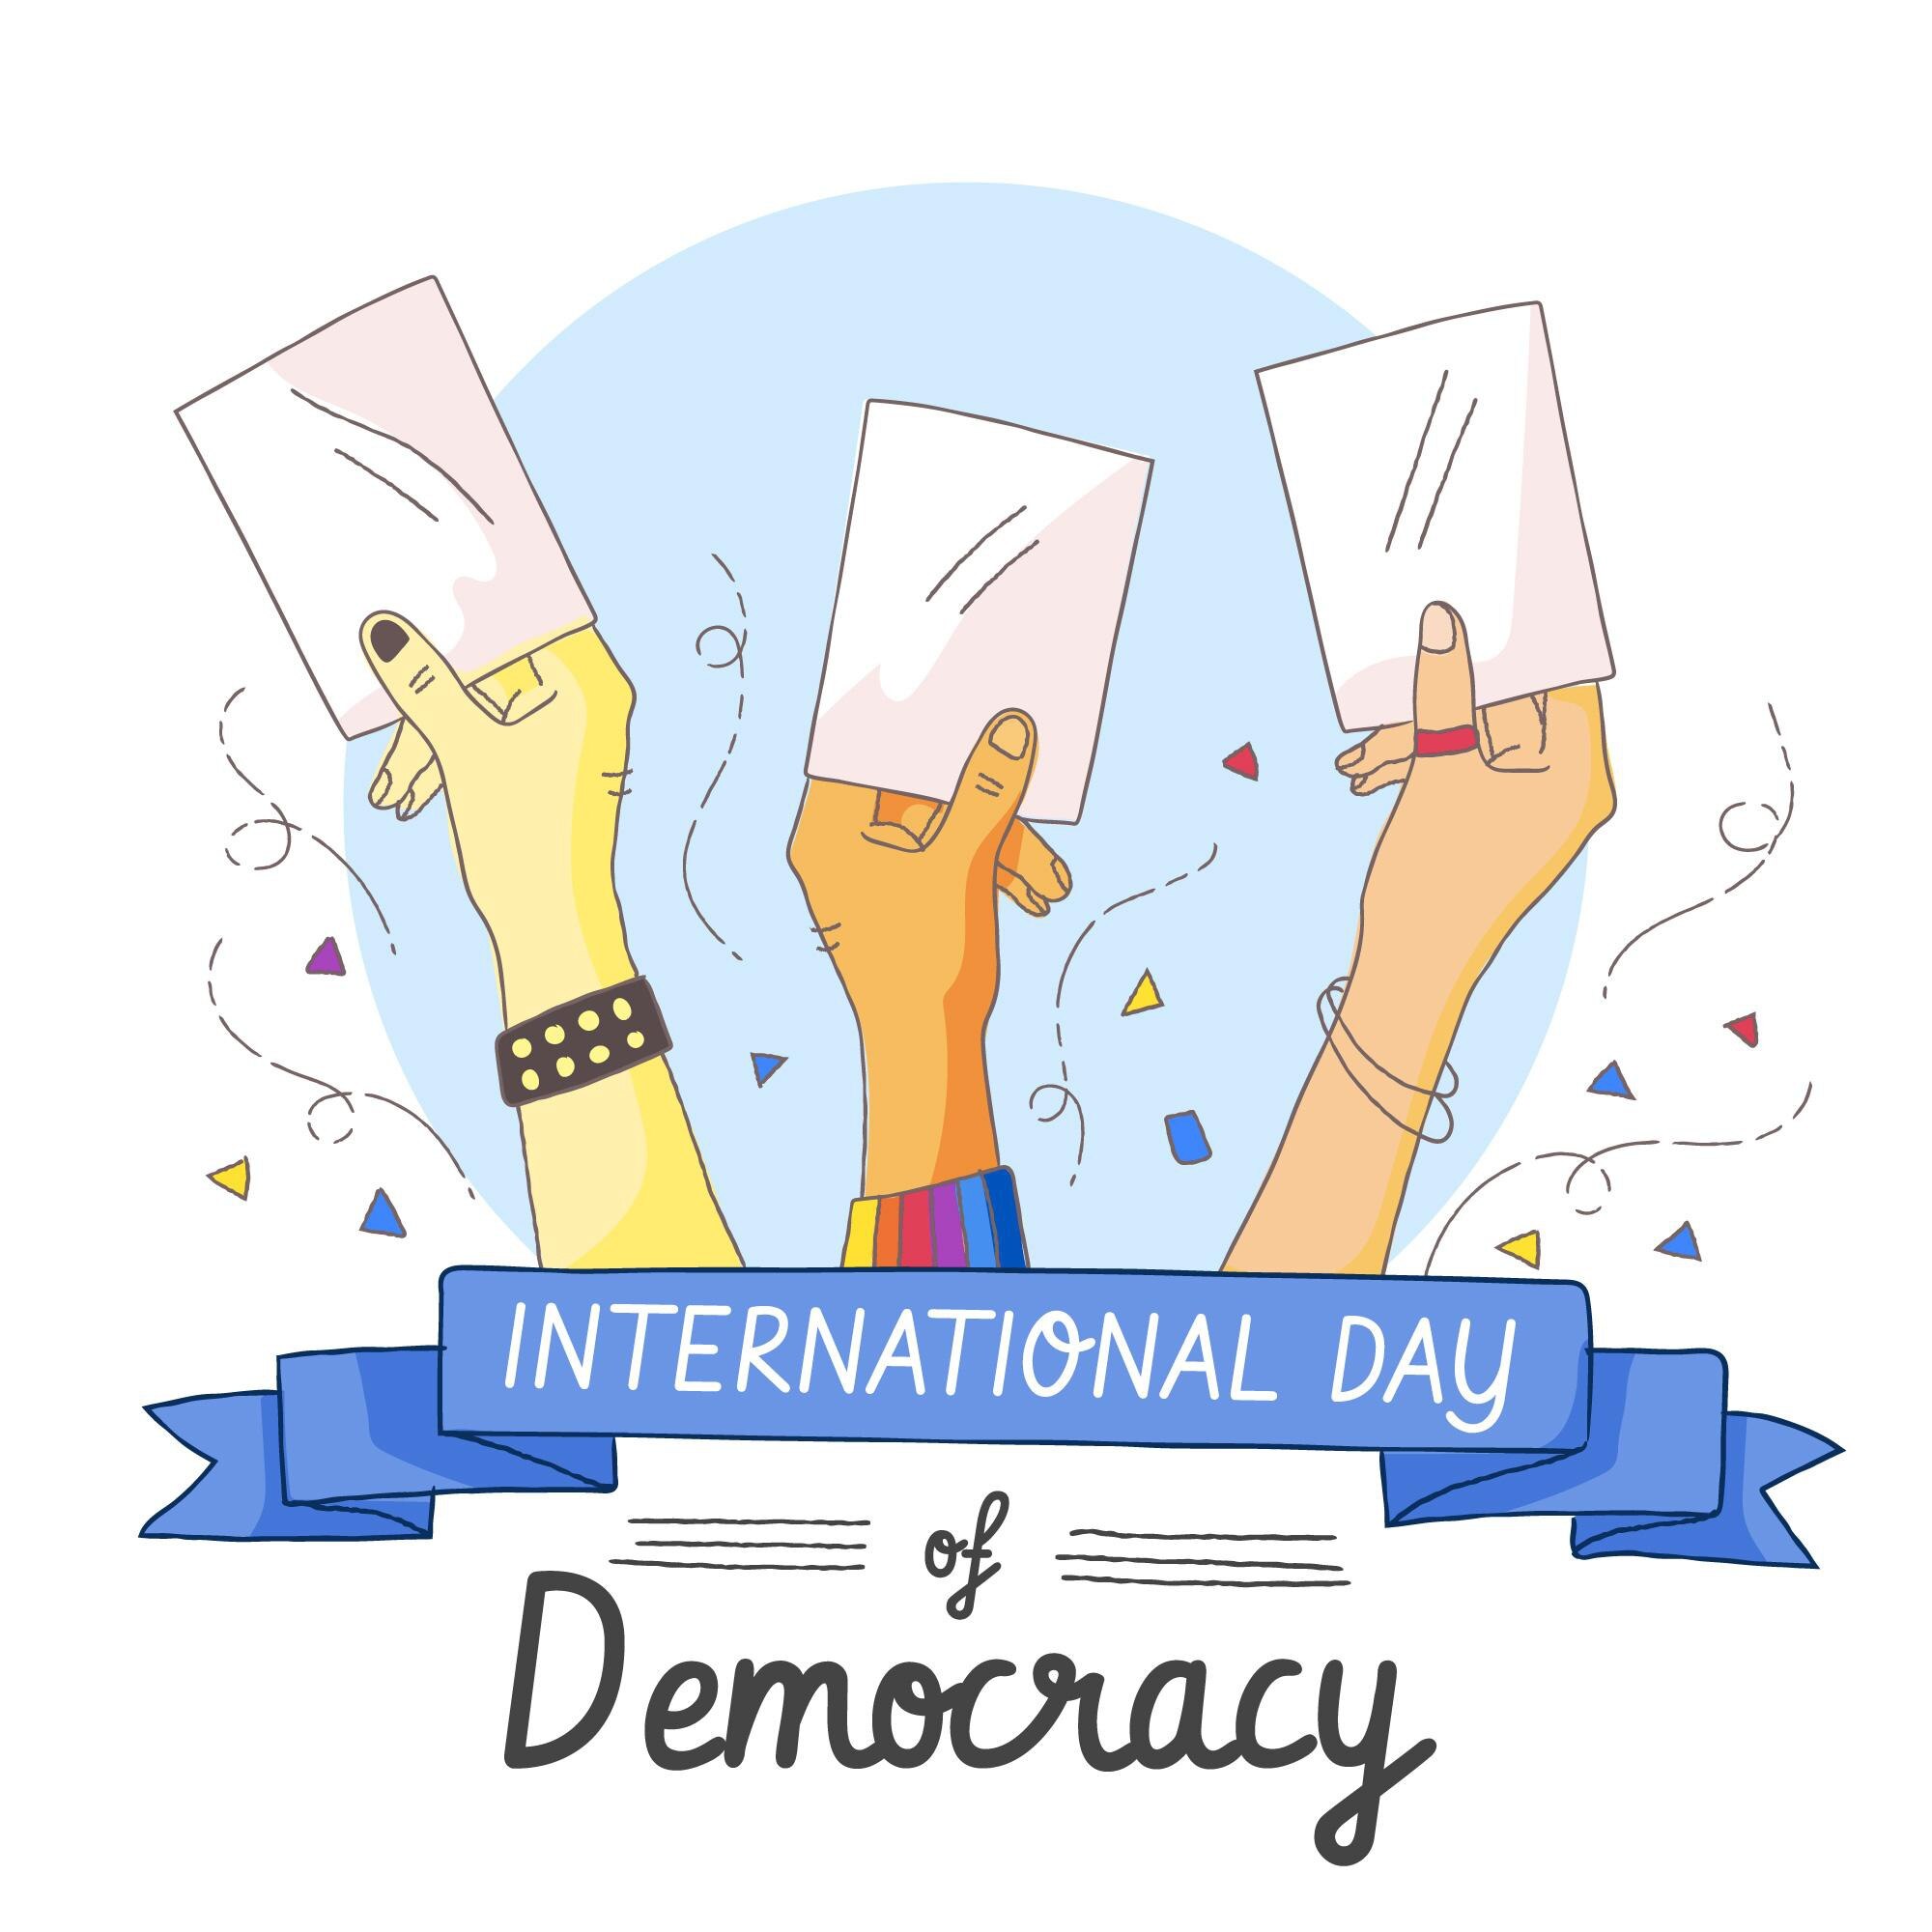 International Day of Democracy 2022 Theme: Quotes, Posters, Images, Messages, Slogans, Wishes, Greetings to share